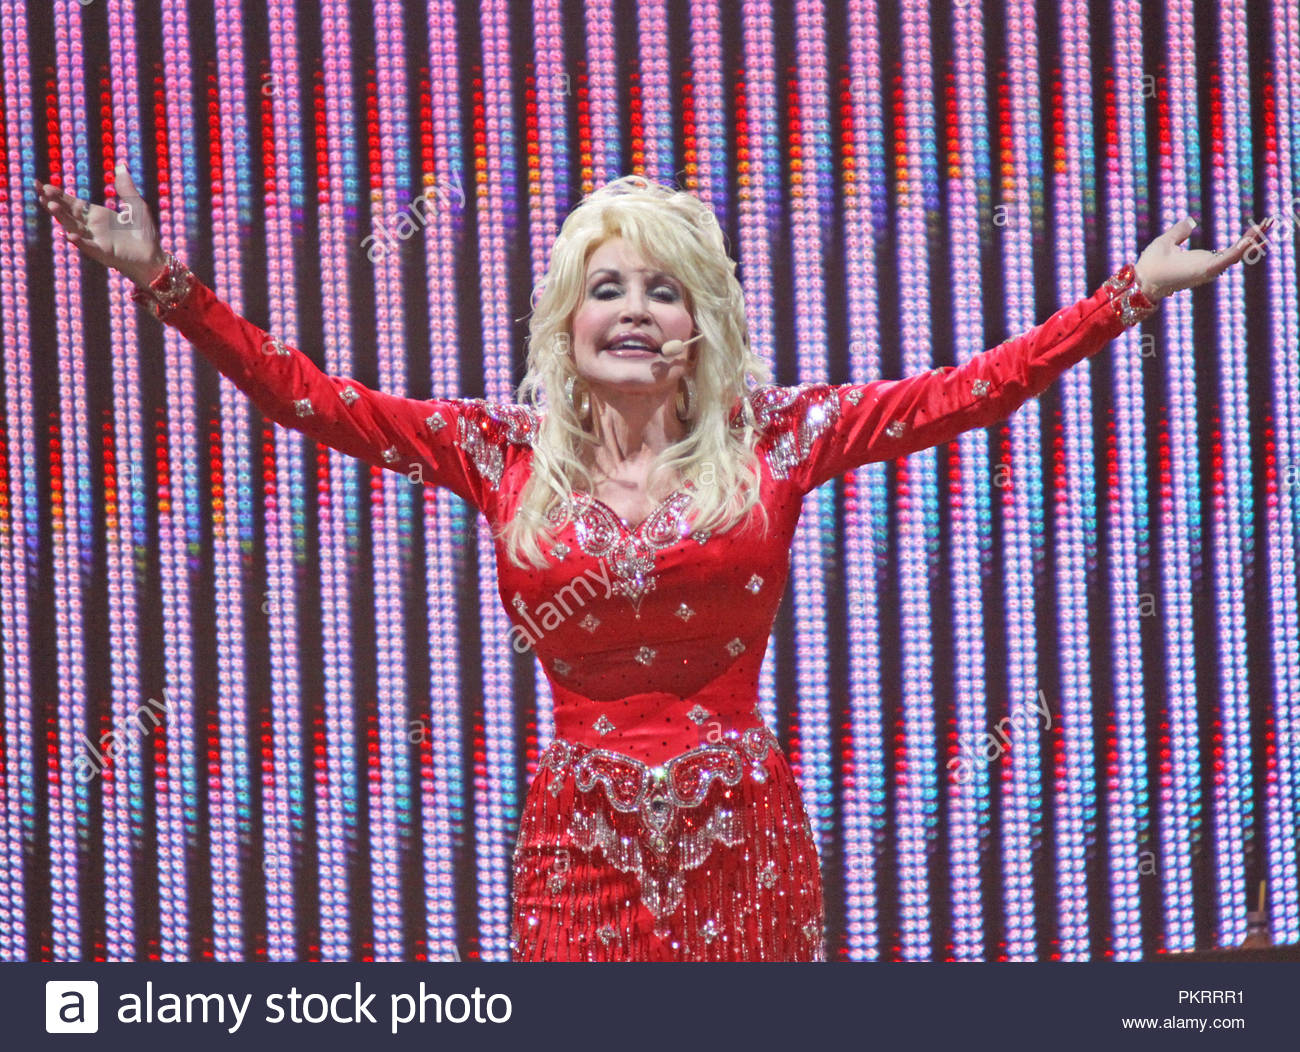 Dolly Rebecca Parton Is An American Singer Stock Photos & Dolly Rebecca Parton Is An ...